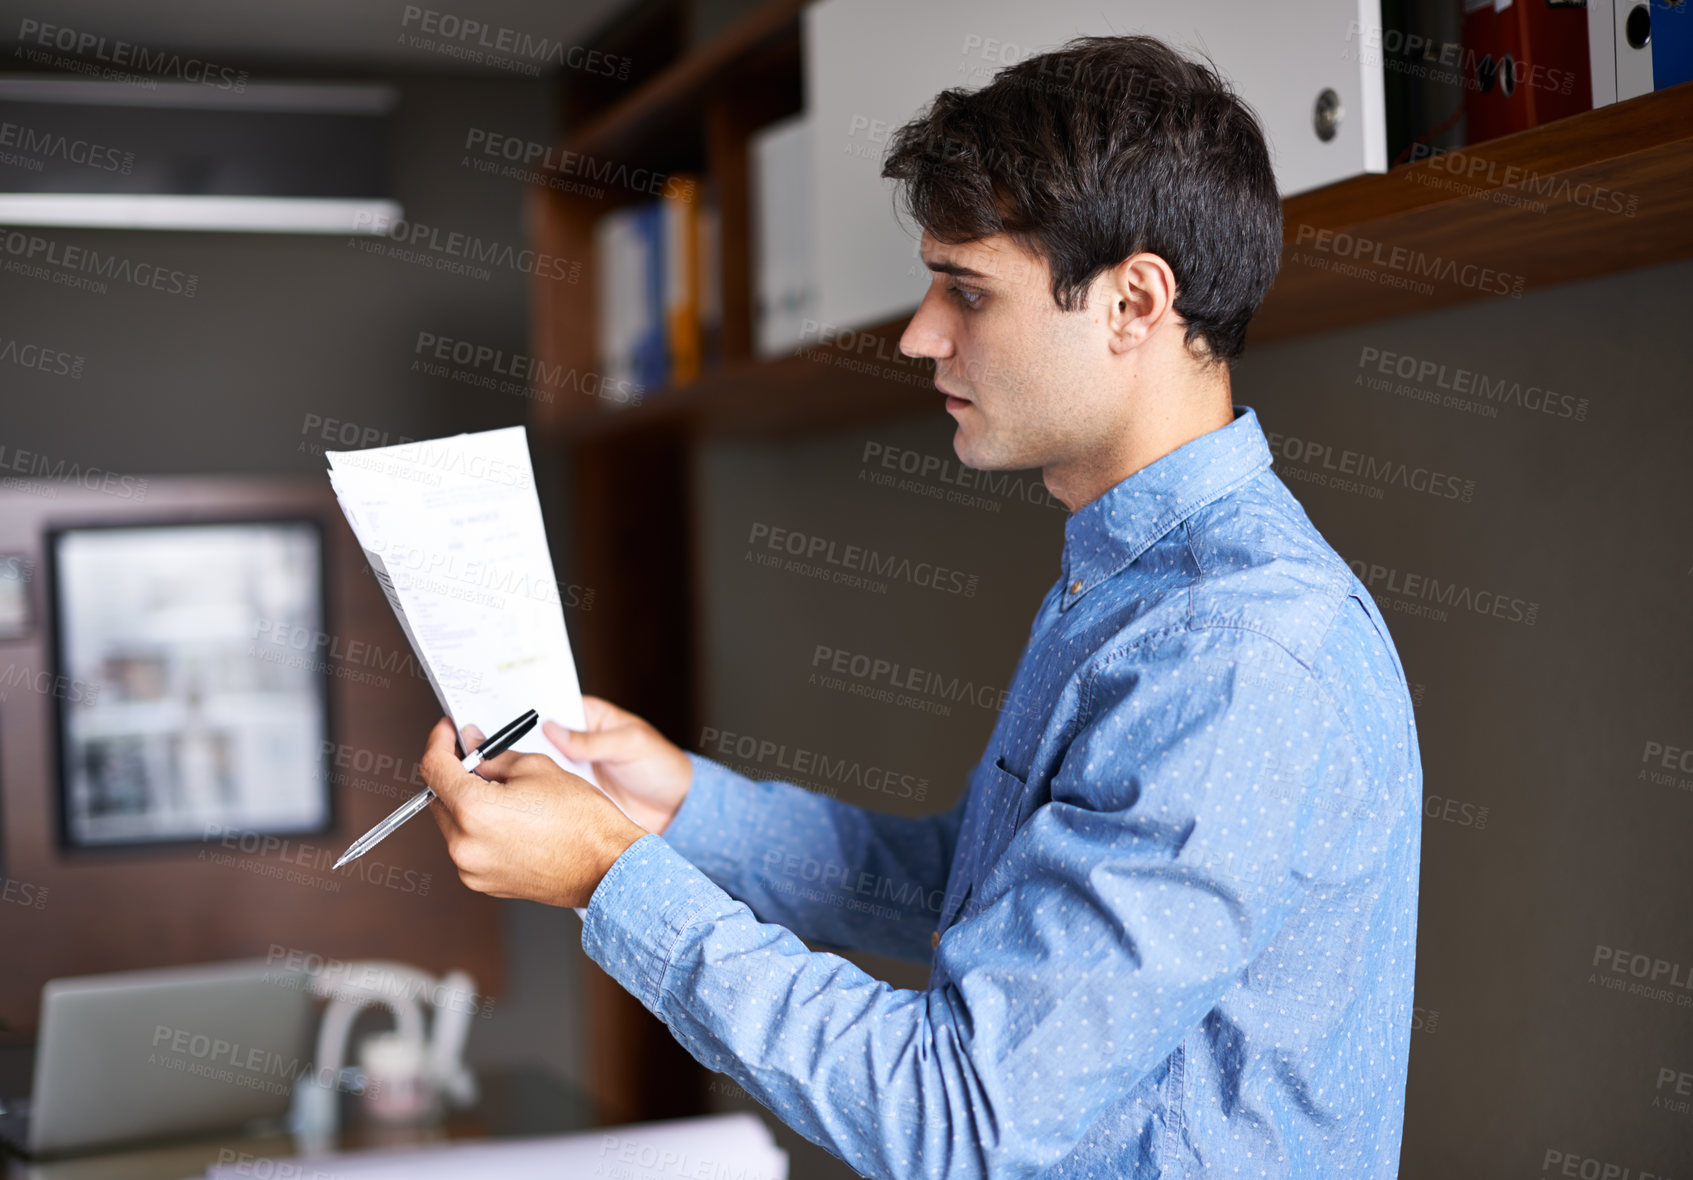 Buy stock photo Shot of a handsome young businessmen looking over some paperwork